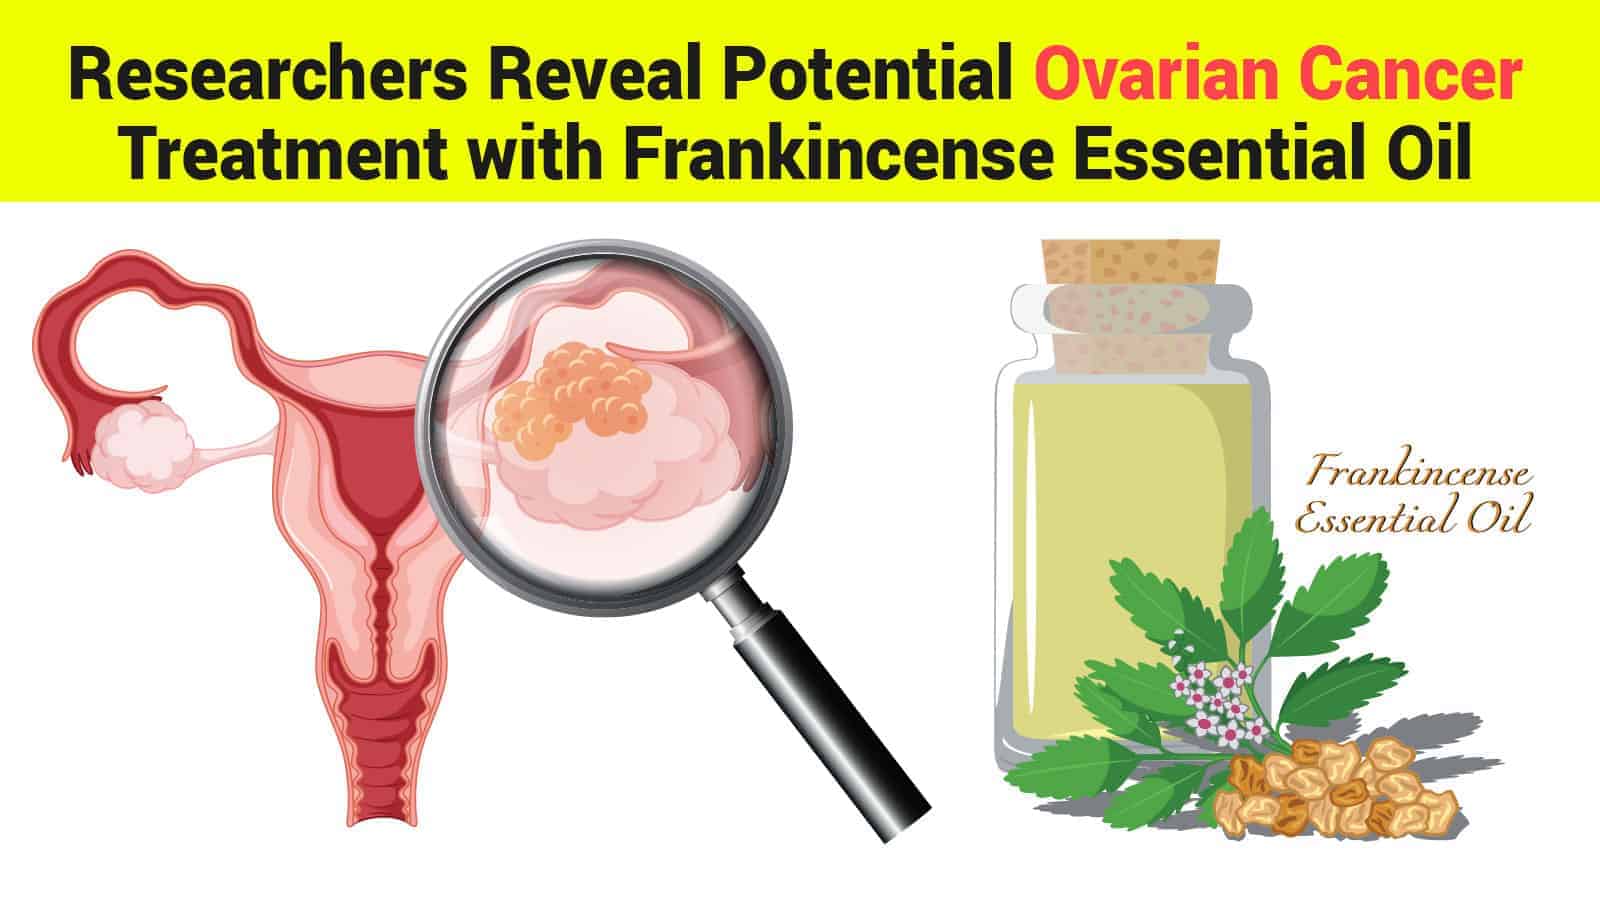 Researchers Reveal Potential Ovarian Cancer Treatment with Frankincense Essential Oil